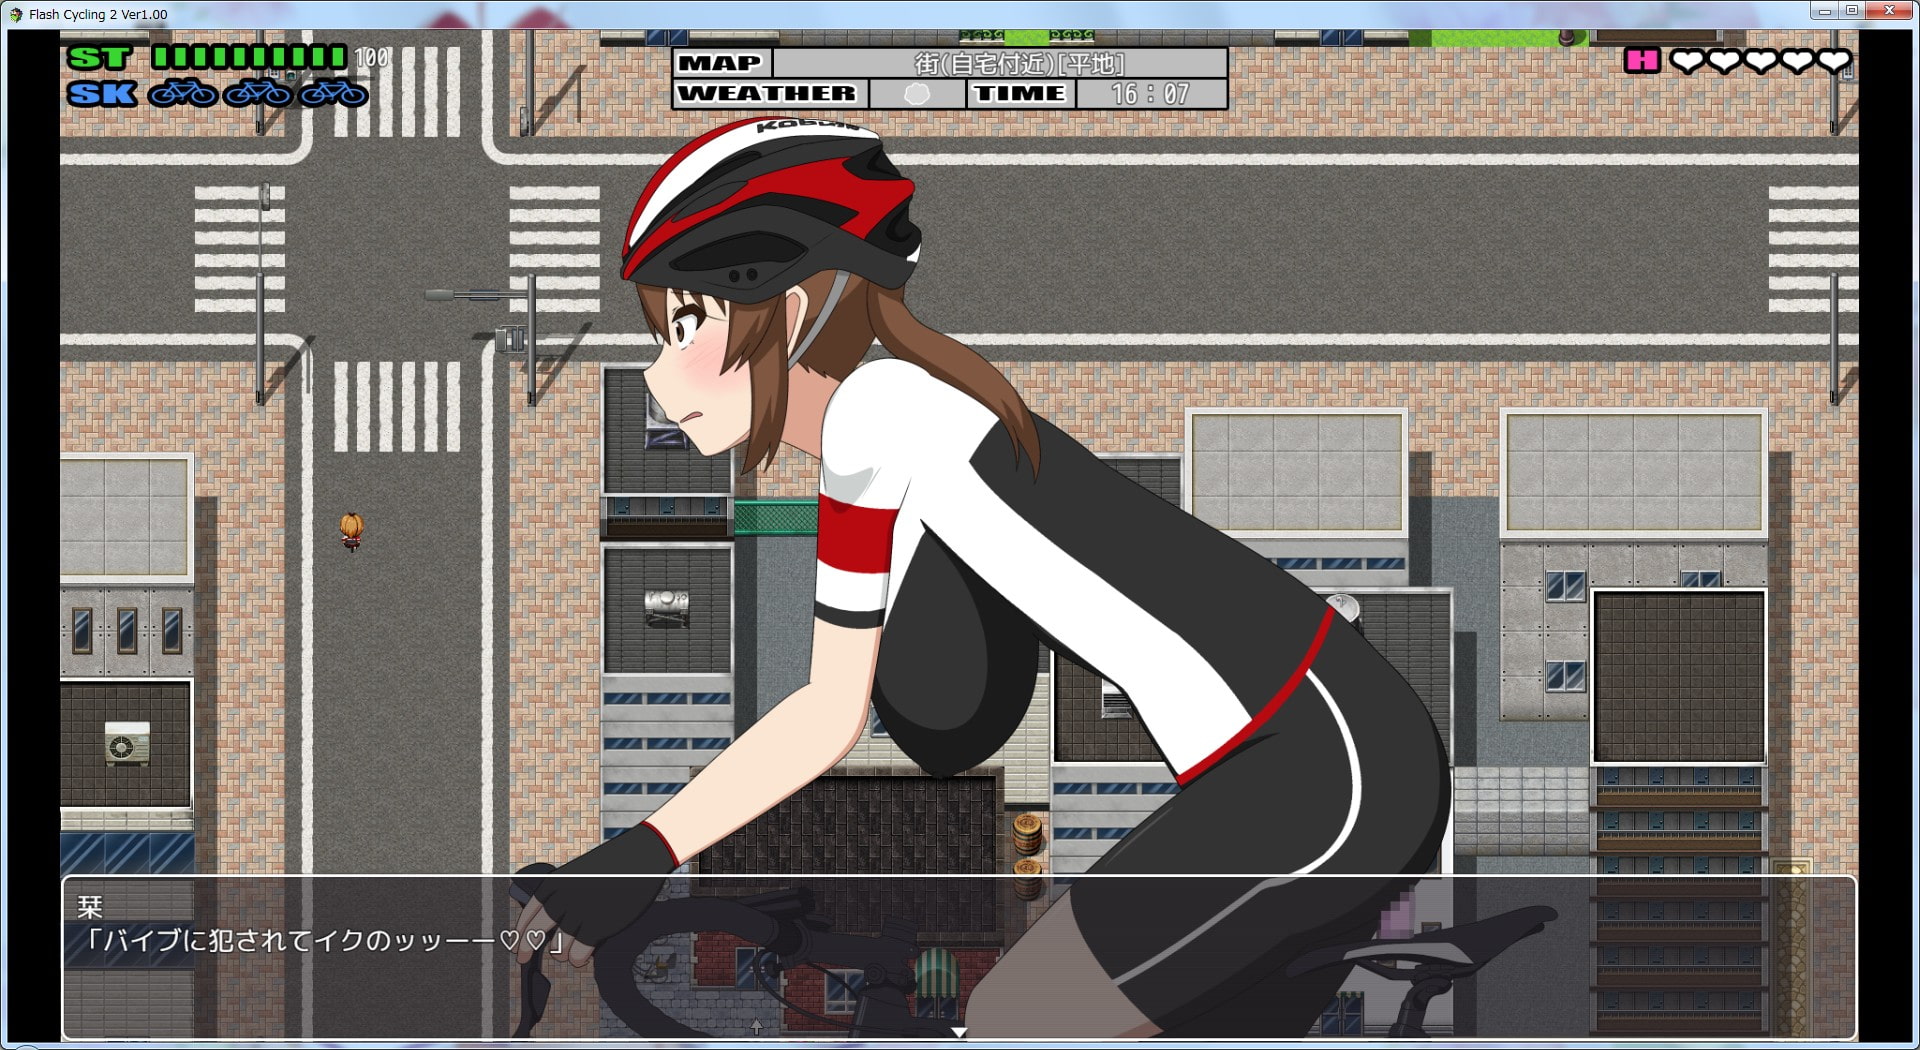 FlashCyclingRide.2 Free Ride Exhibitionist RPG H.H.WORKS. 